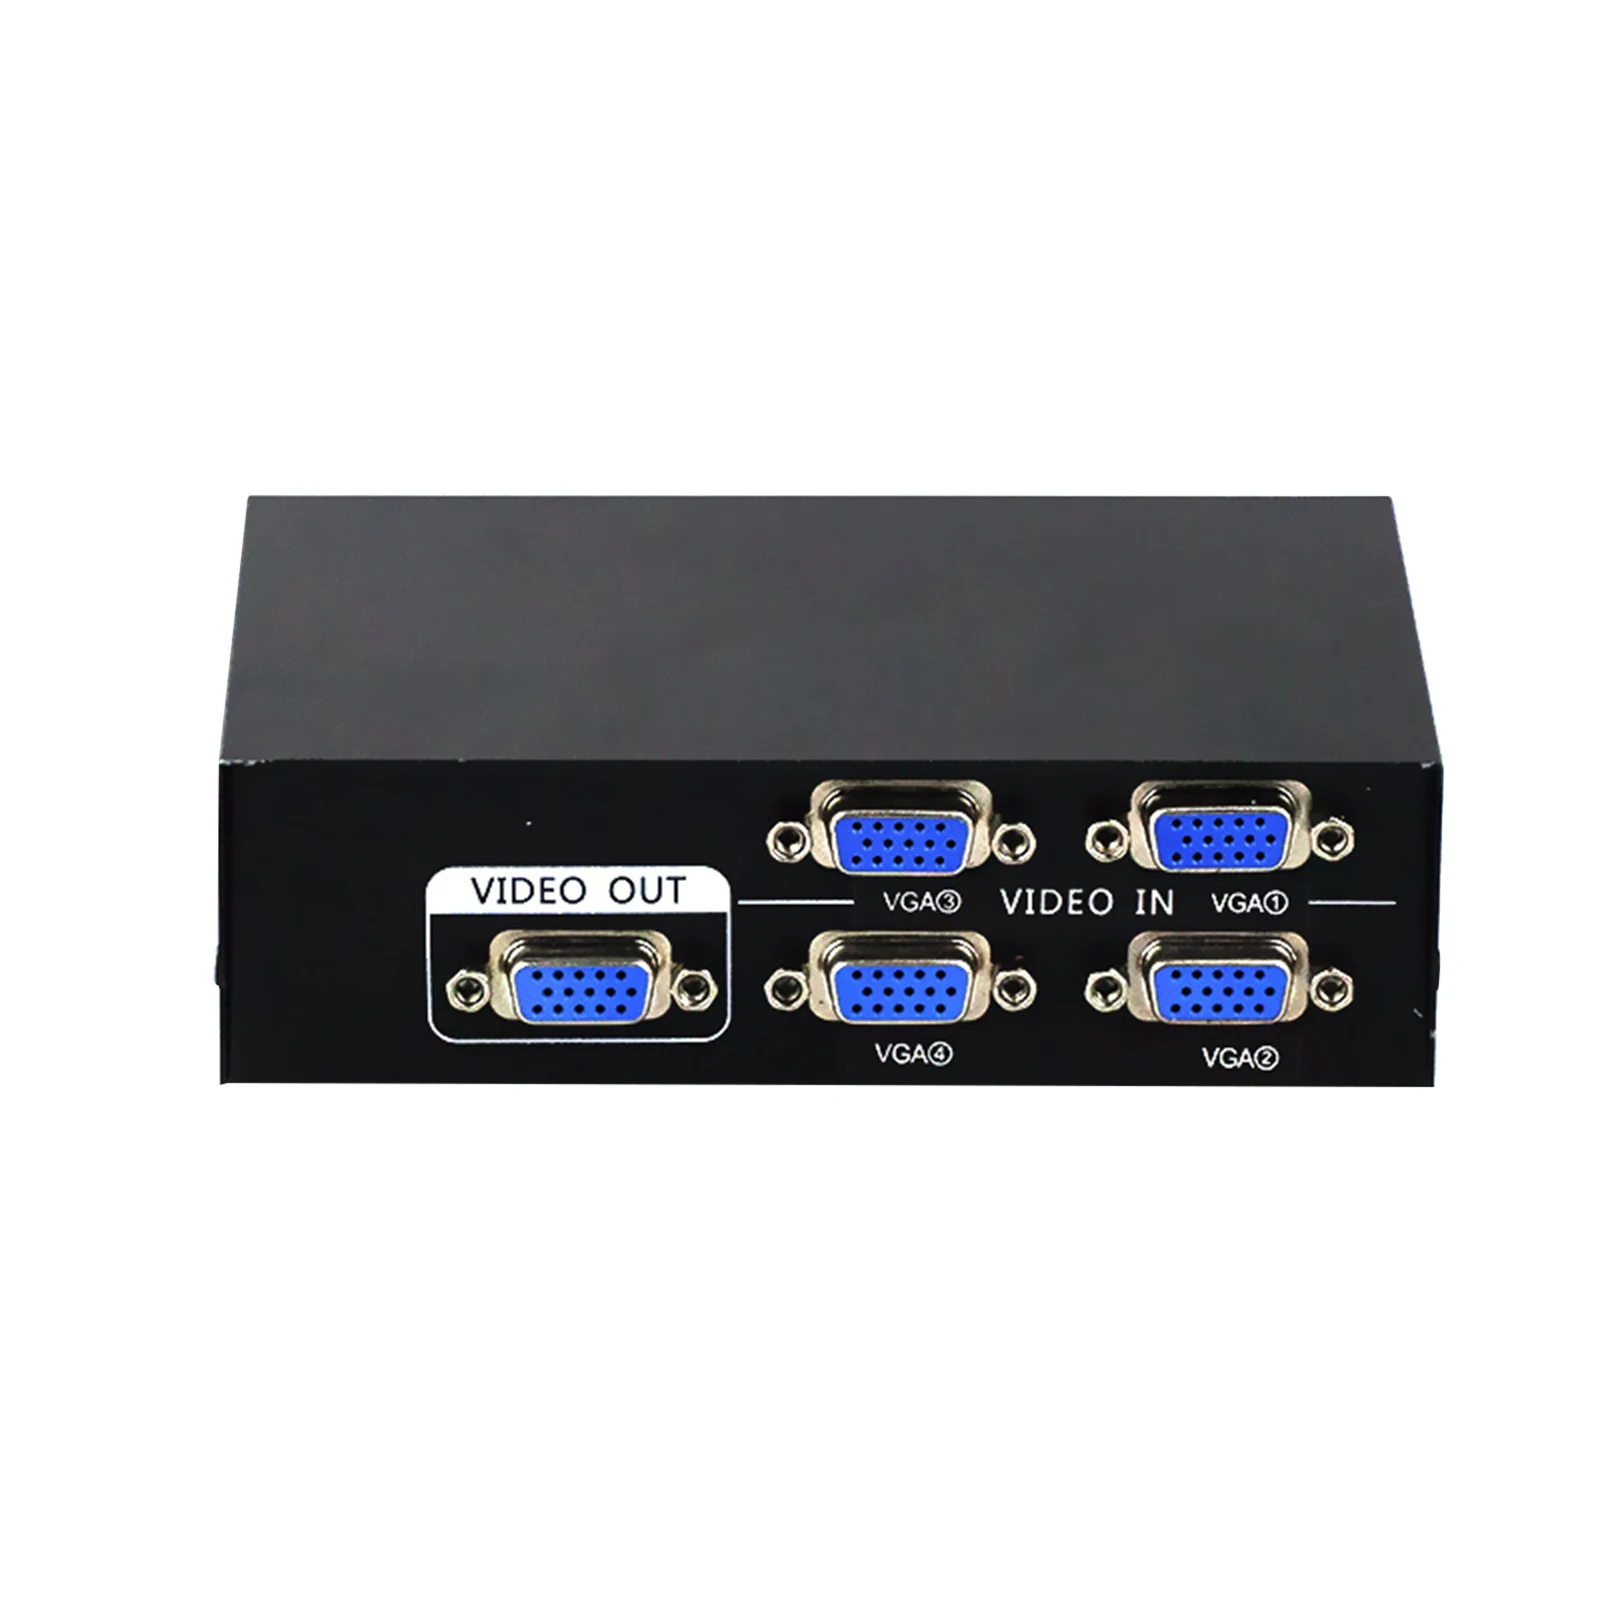 

VGA Switch 4 Port VGA Video HD Signal Amplifier Booster 4x1 Splitter 1920*1440 For 4 Computers Share 1 Monitor / Projector